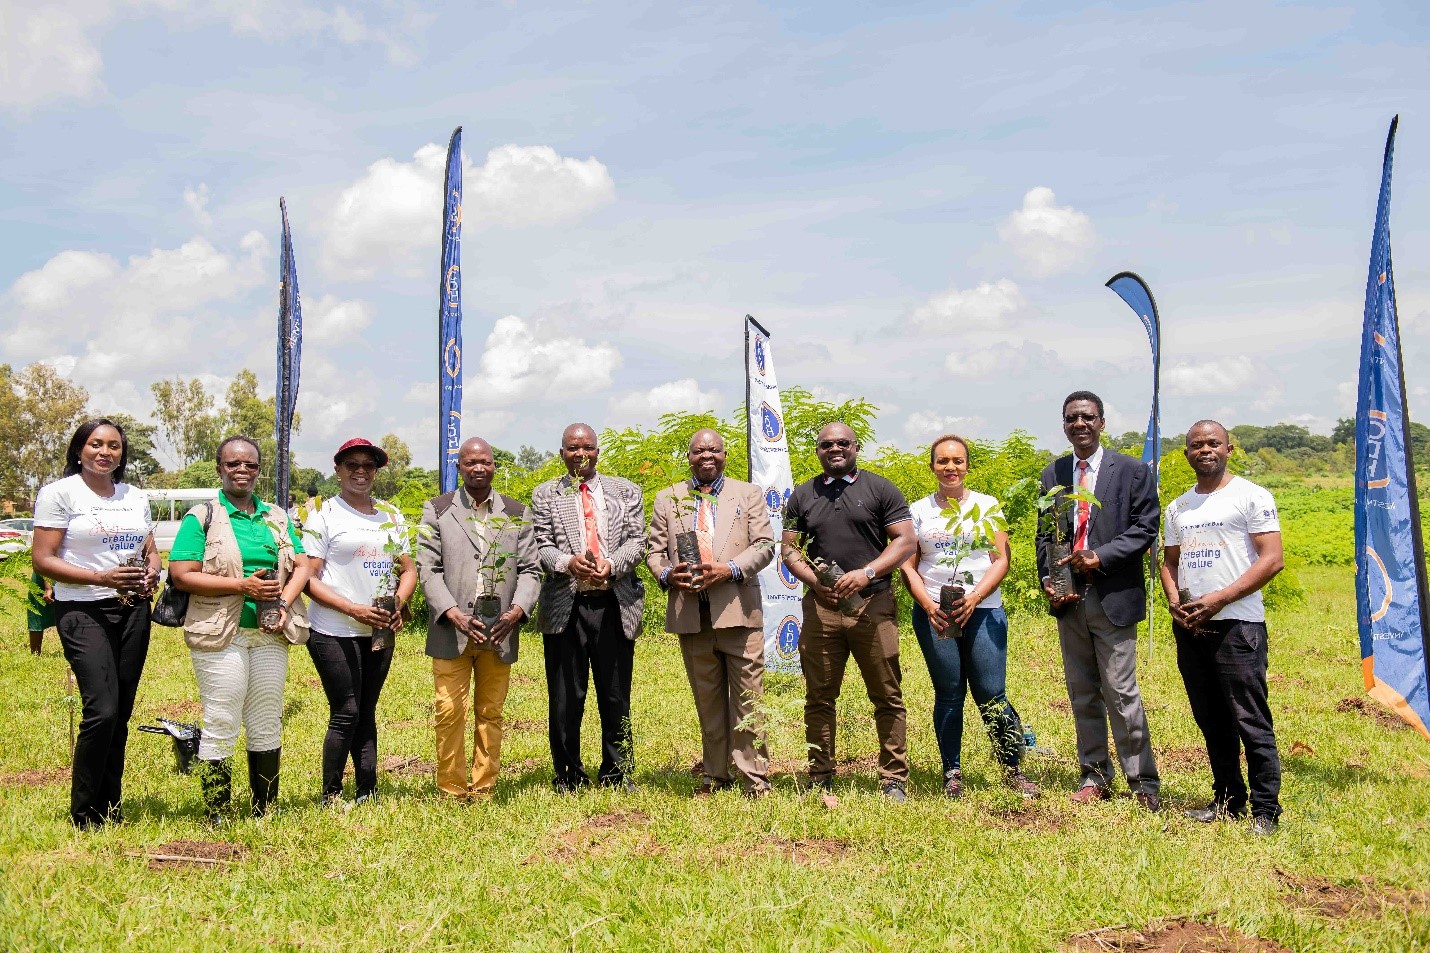 Representatives from CDH Investment Bank and Lilongwe University of Agriculture & Natural Resources pose with tree-seedlinga prior to commencing the tree-planting exercise